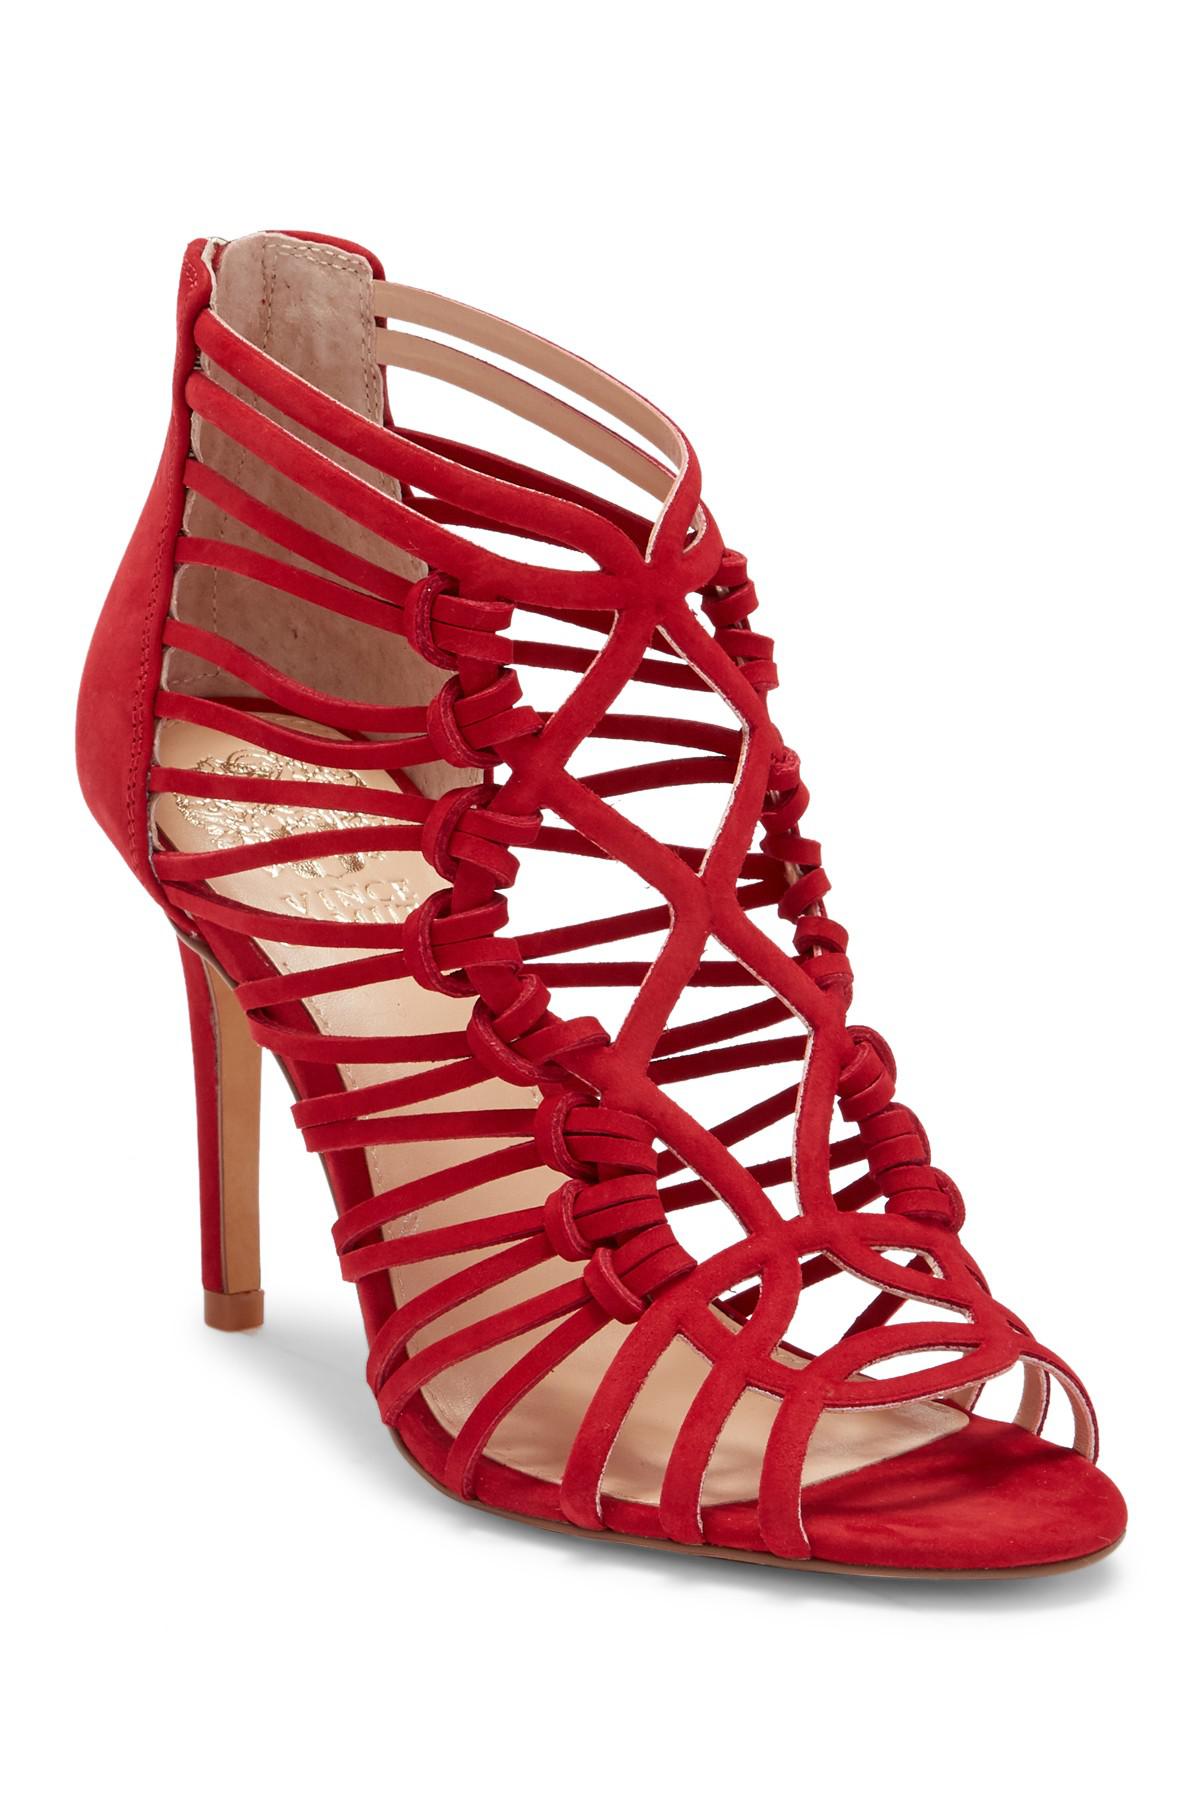 Vince Camuto Leather Joshalan Strappy Suede Sandal in Red - Lyst